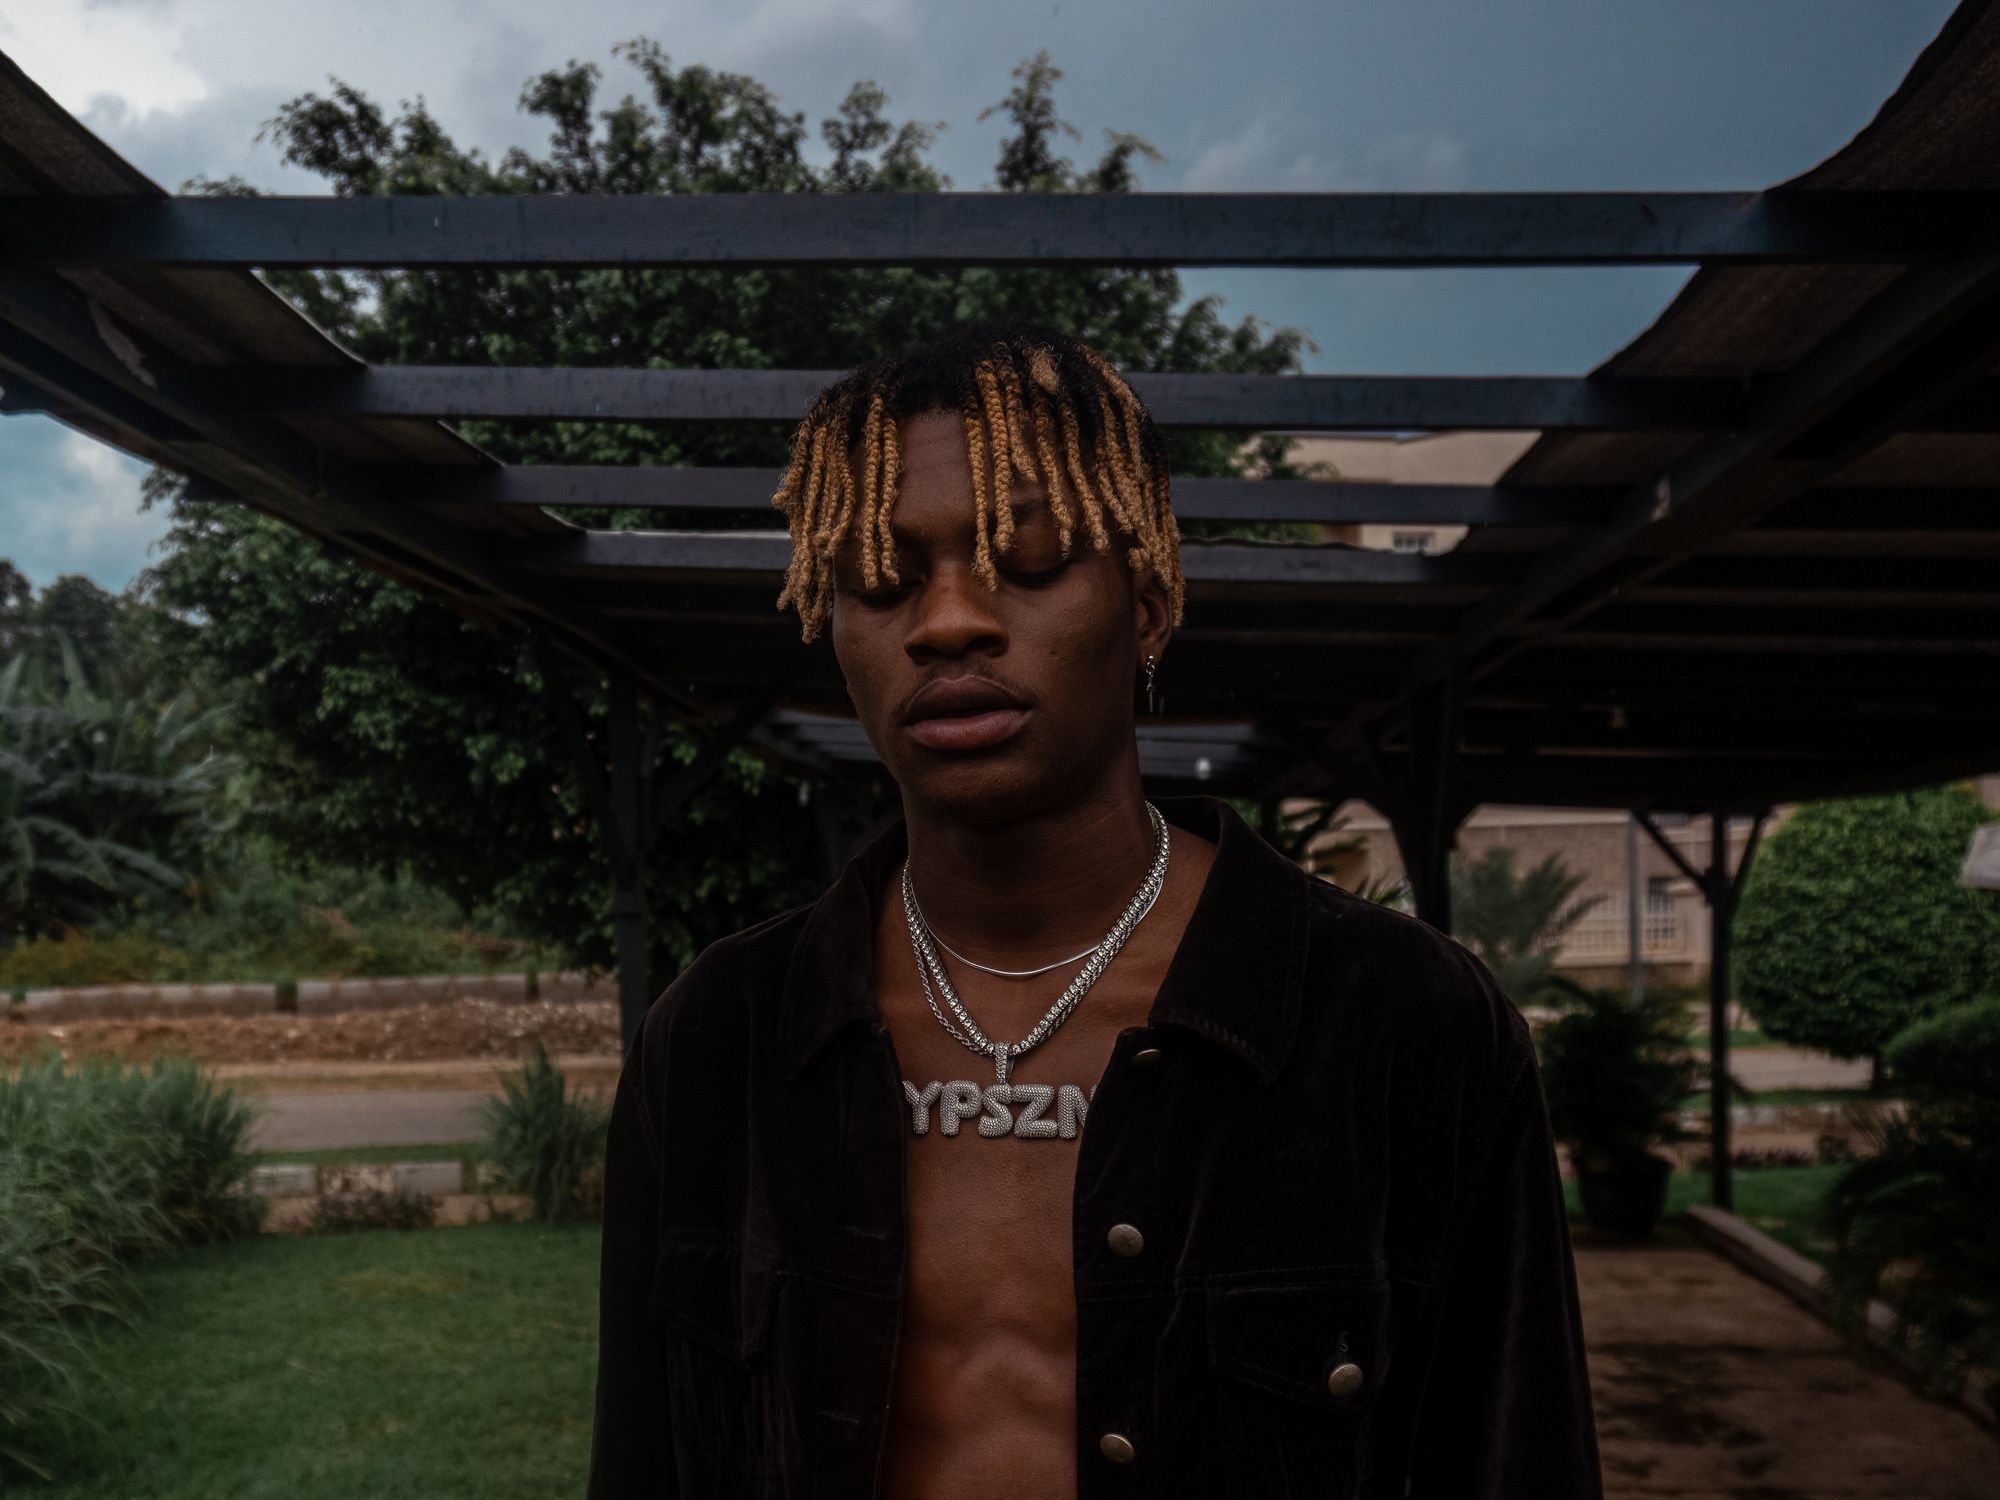 Interview: PsychoYP Wants to Lead the New Wave of Nigerian Hip-Hop